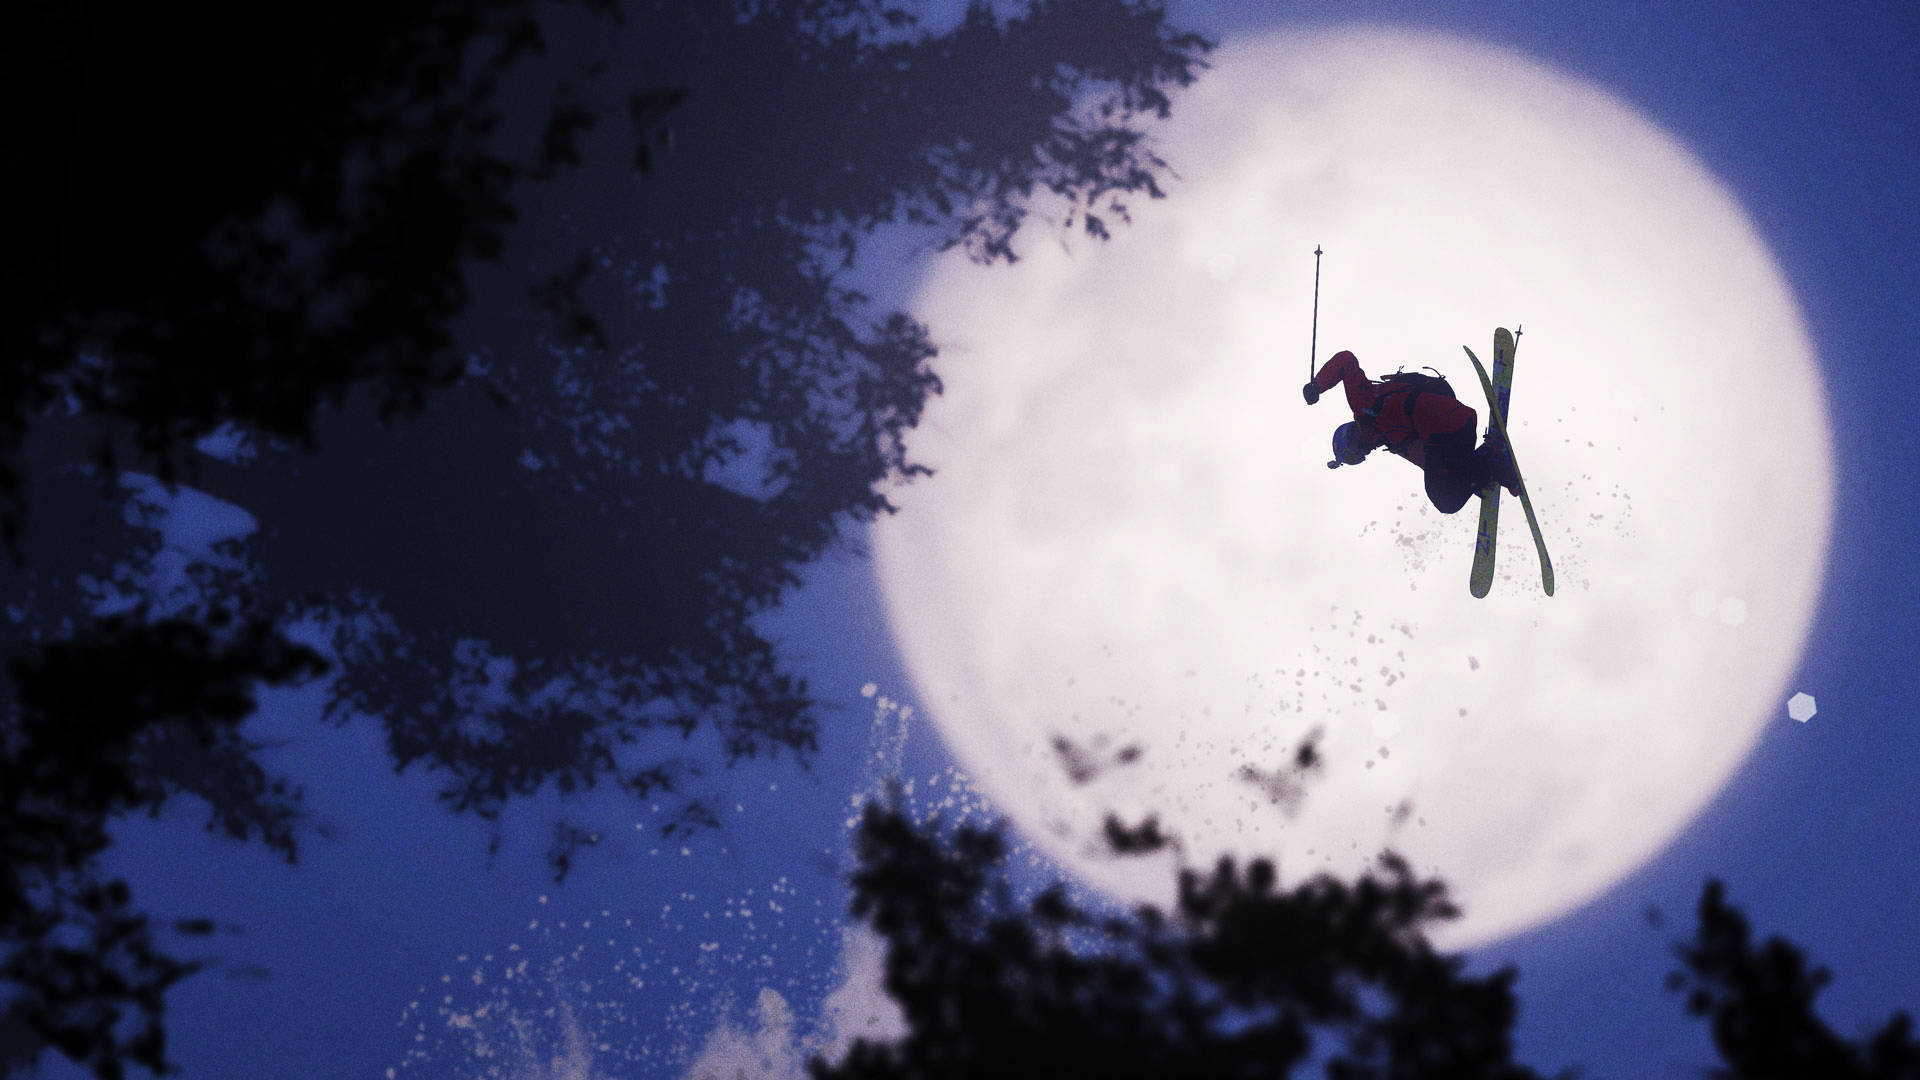 Steep Skiing In The Moonlight Background